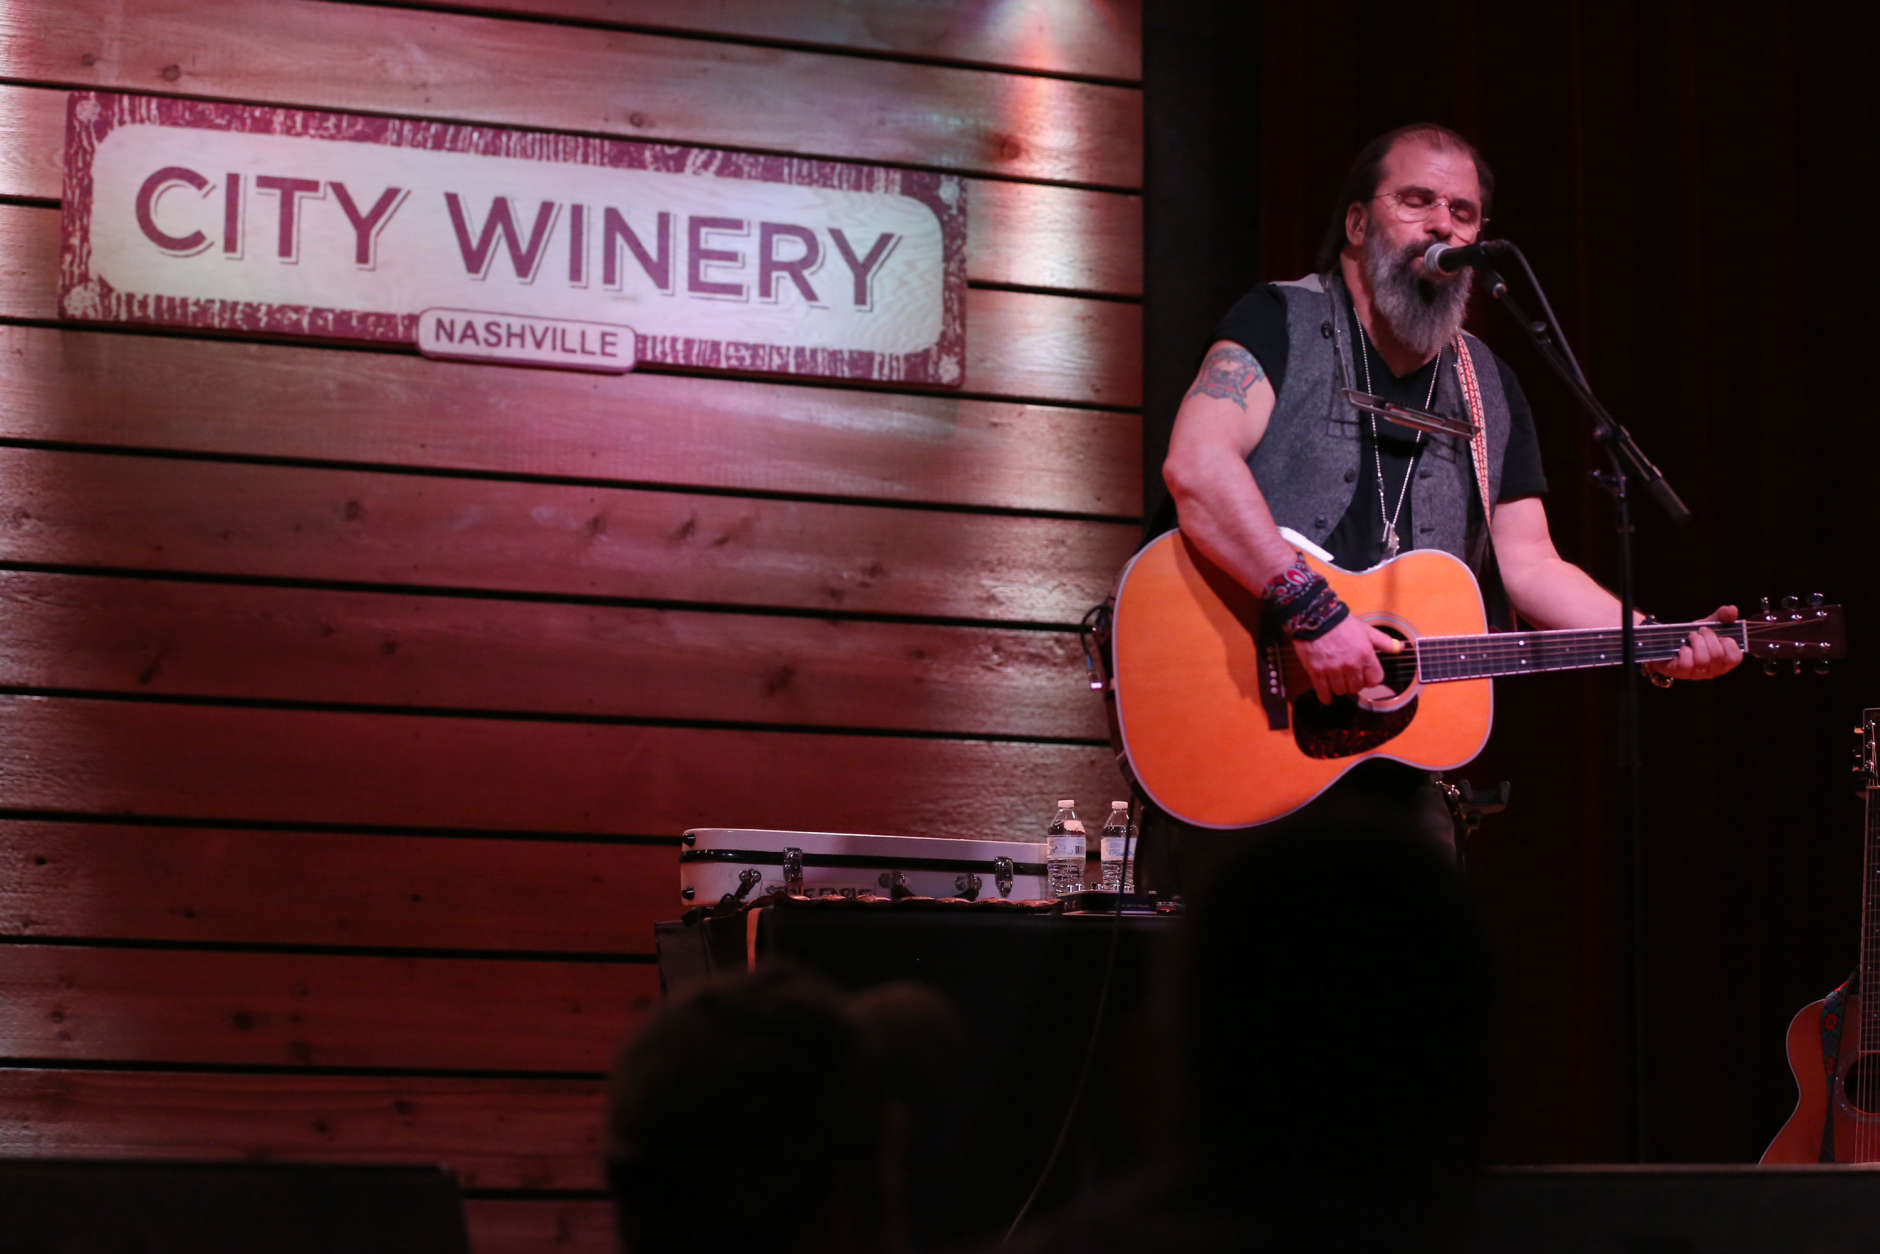 Artist Steve Earle performs at his January residency at City Winery on Thursday, Jan. 12, 2017 in Nashville, Tenn. (Photo by Laura Roberts/Invision/AP)